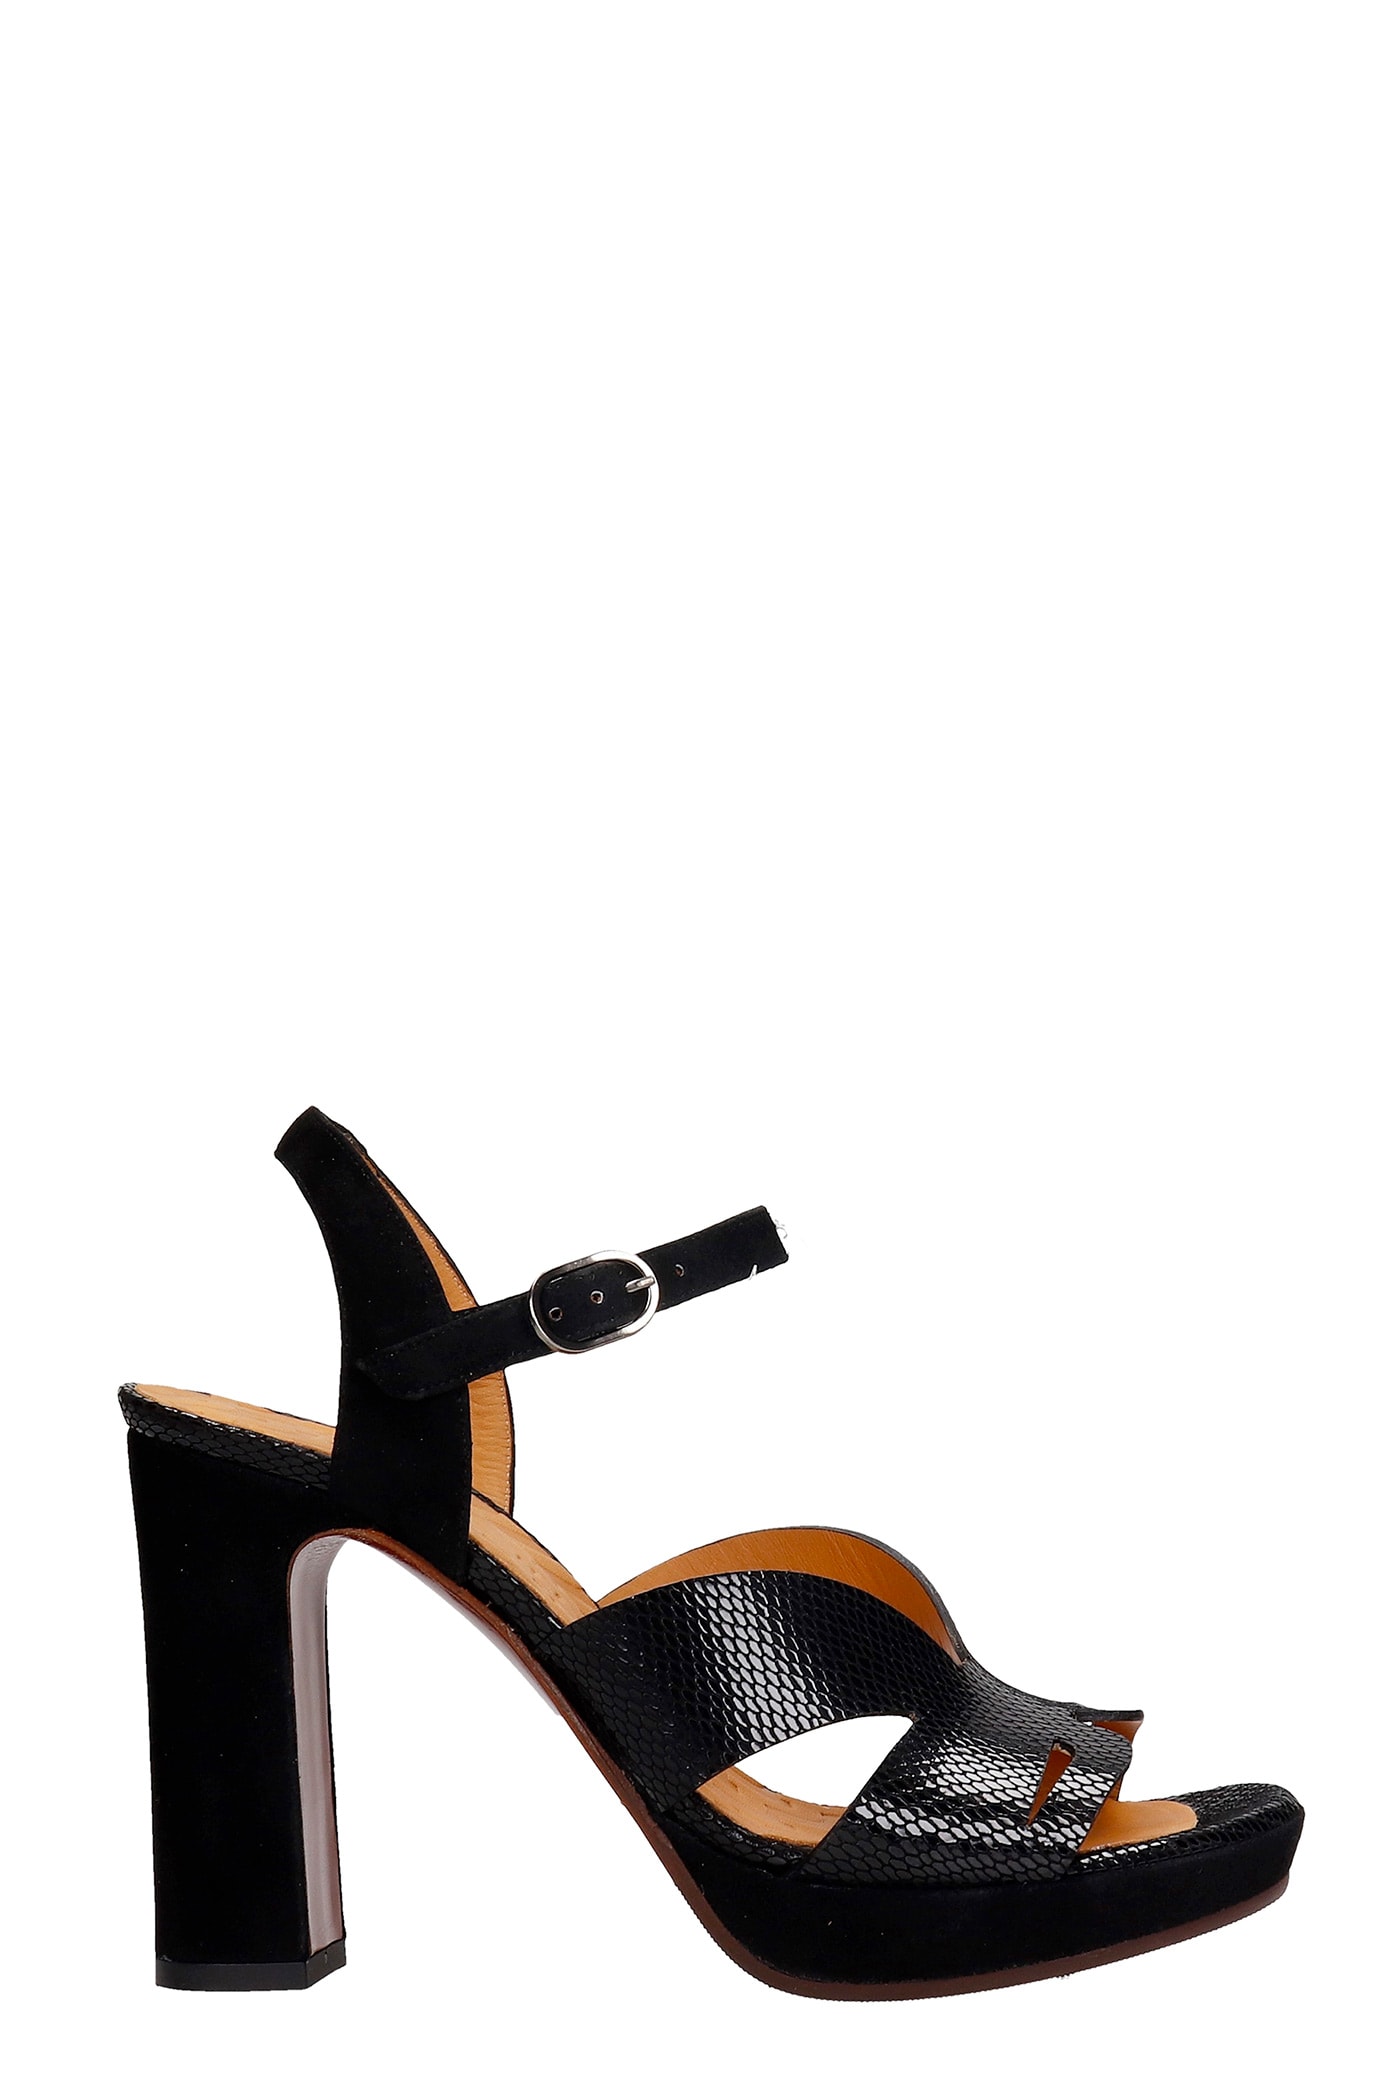 Chie Mihara Canina-l Sandals In Black Suede And Leather